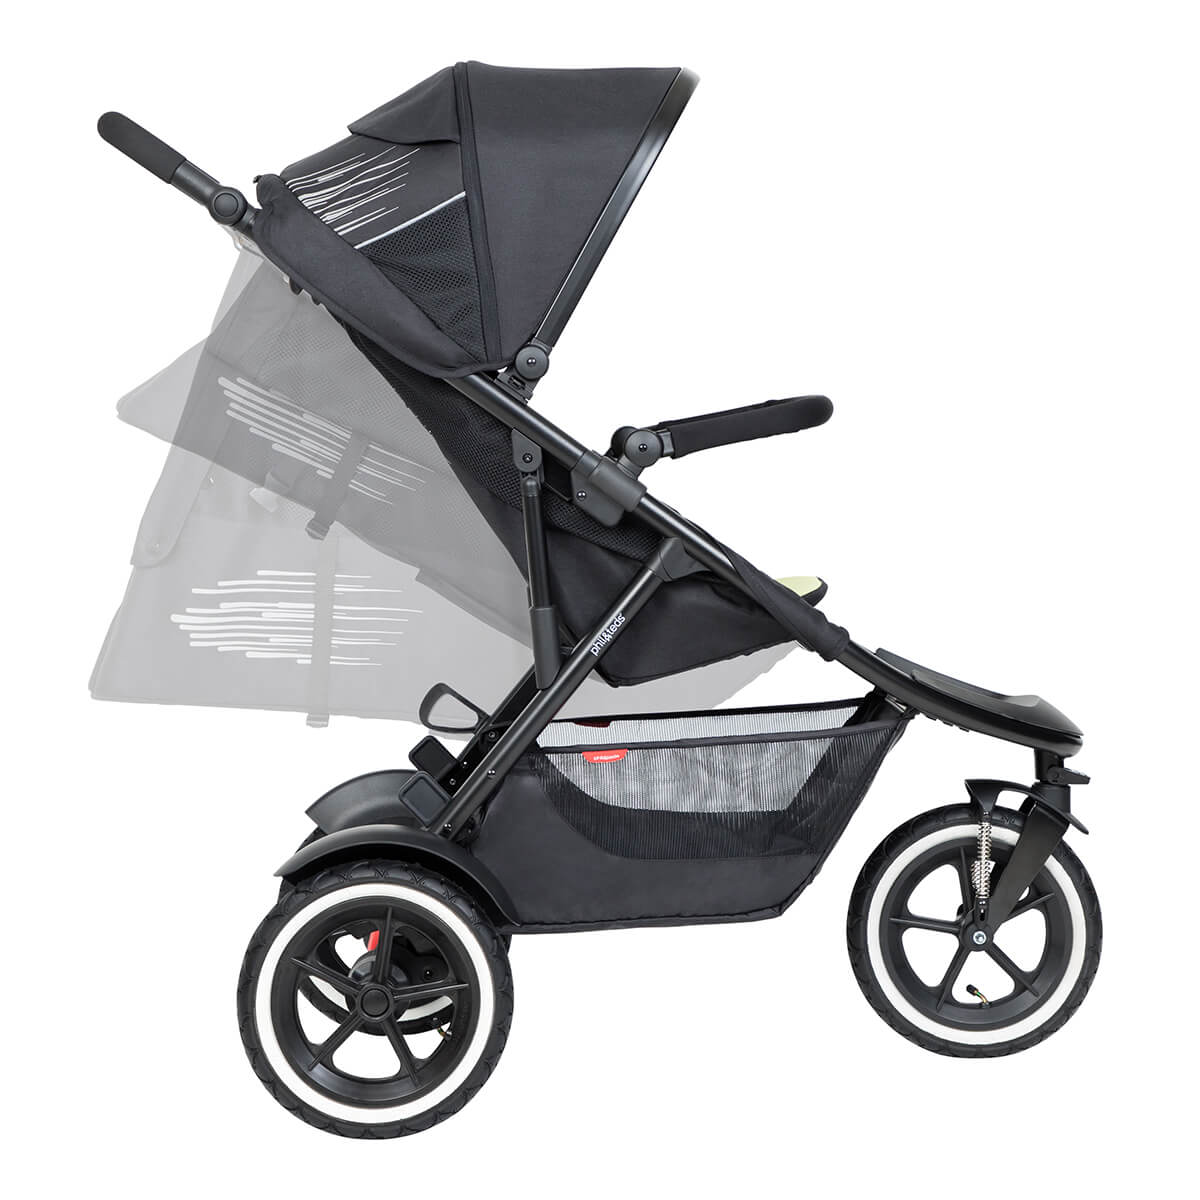 https://cdn.accentuate.io/7593364193450/19793939267754/philteds-sport-buggy-can-recline-in-multiple-angles-including-full-recline-for-newborn-baby-v1667533631507.jpg?1200x1200